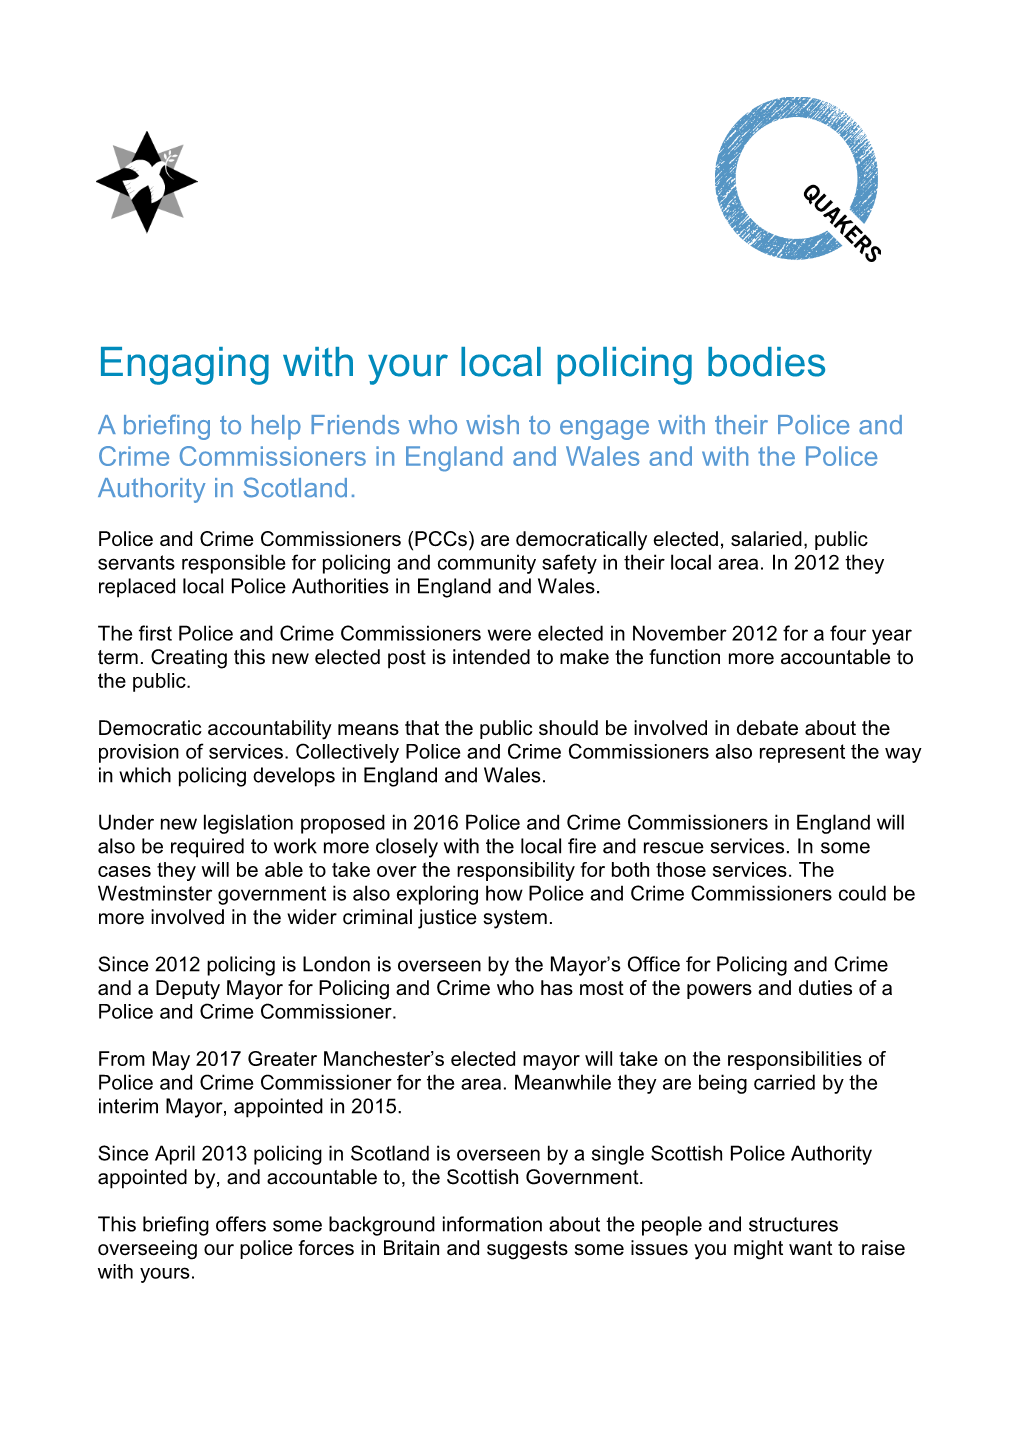 Engaging with Your Local Policing Bodies